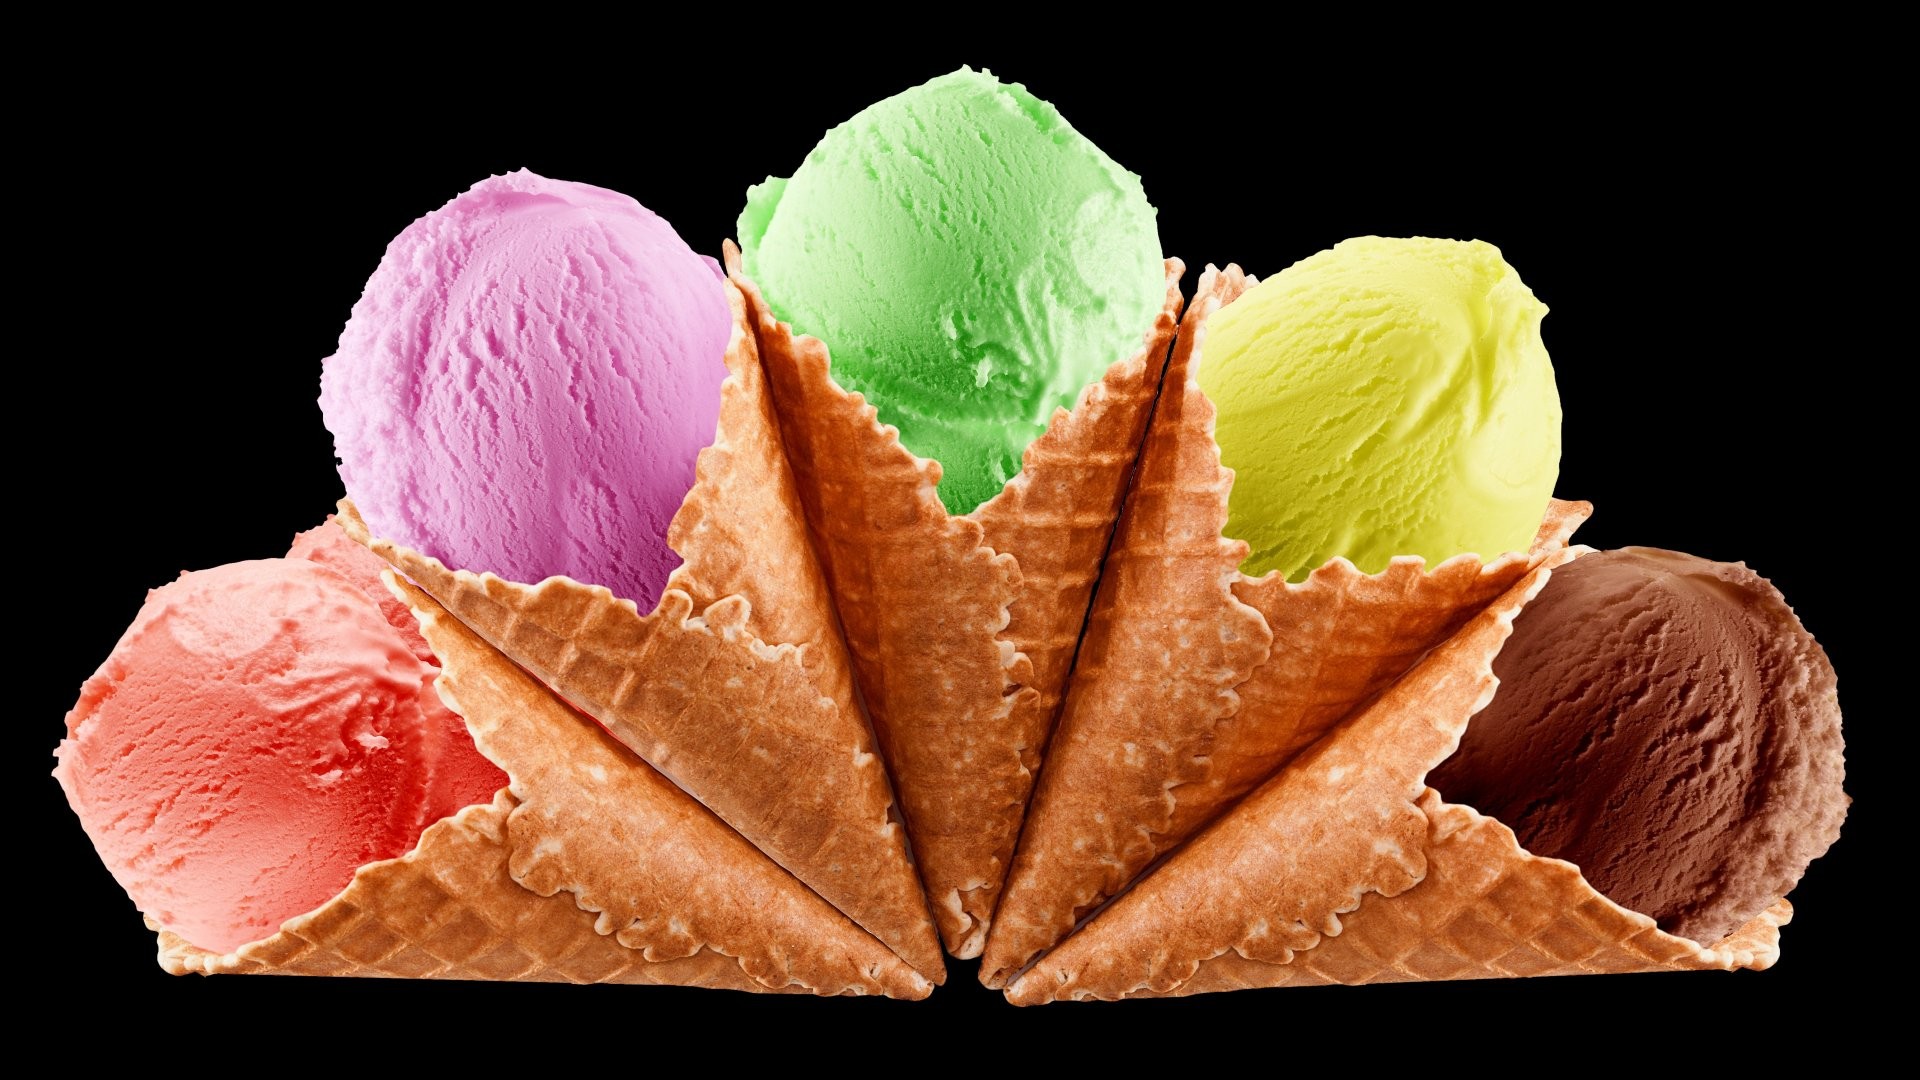 Best Ice Cream Cone Wallpaper with high-resolution 1920x1080 pixel. You can use this wallpaper for your Windows and Mac OS computers as well as your Android and iPhone smartphones